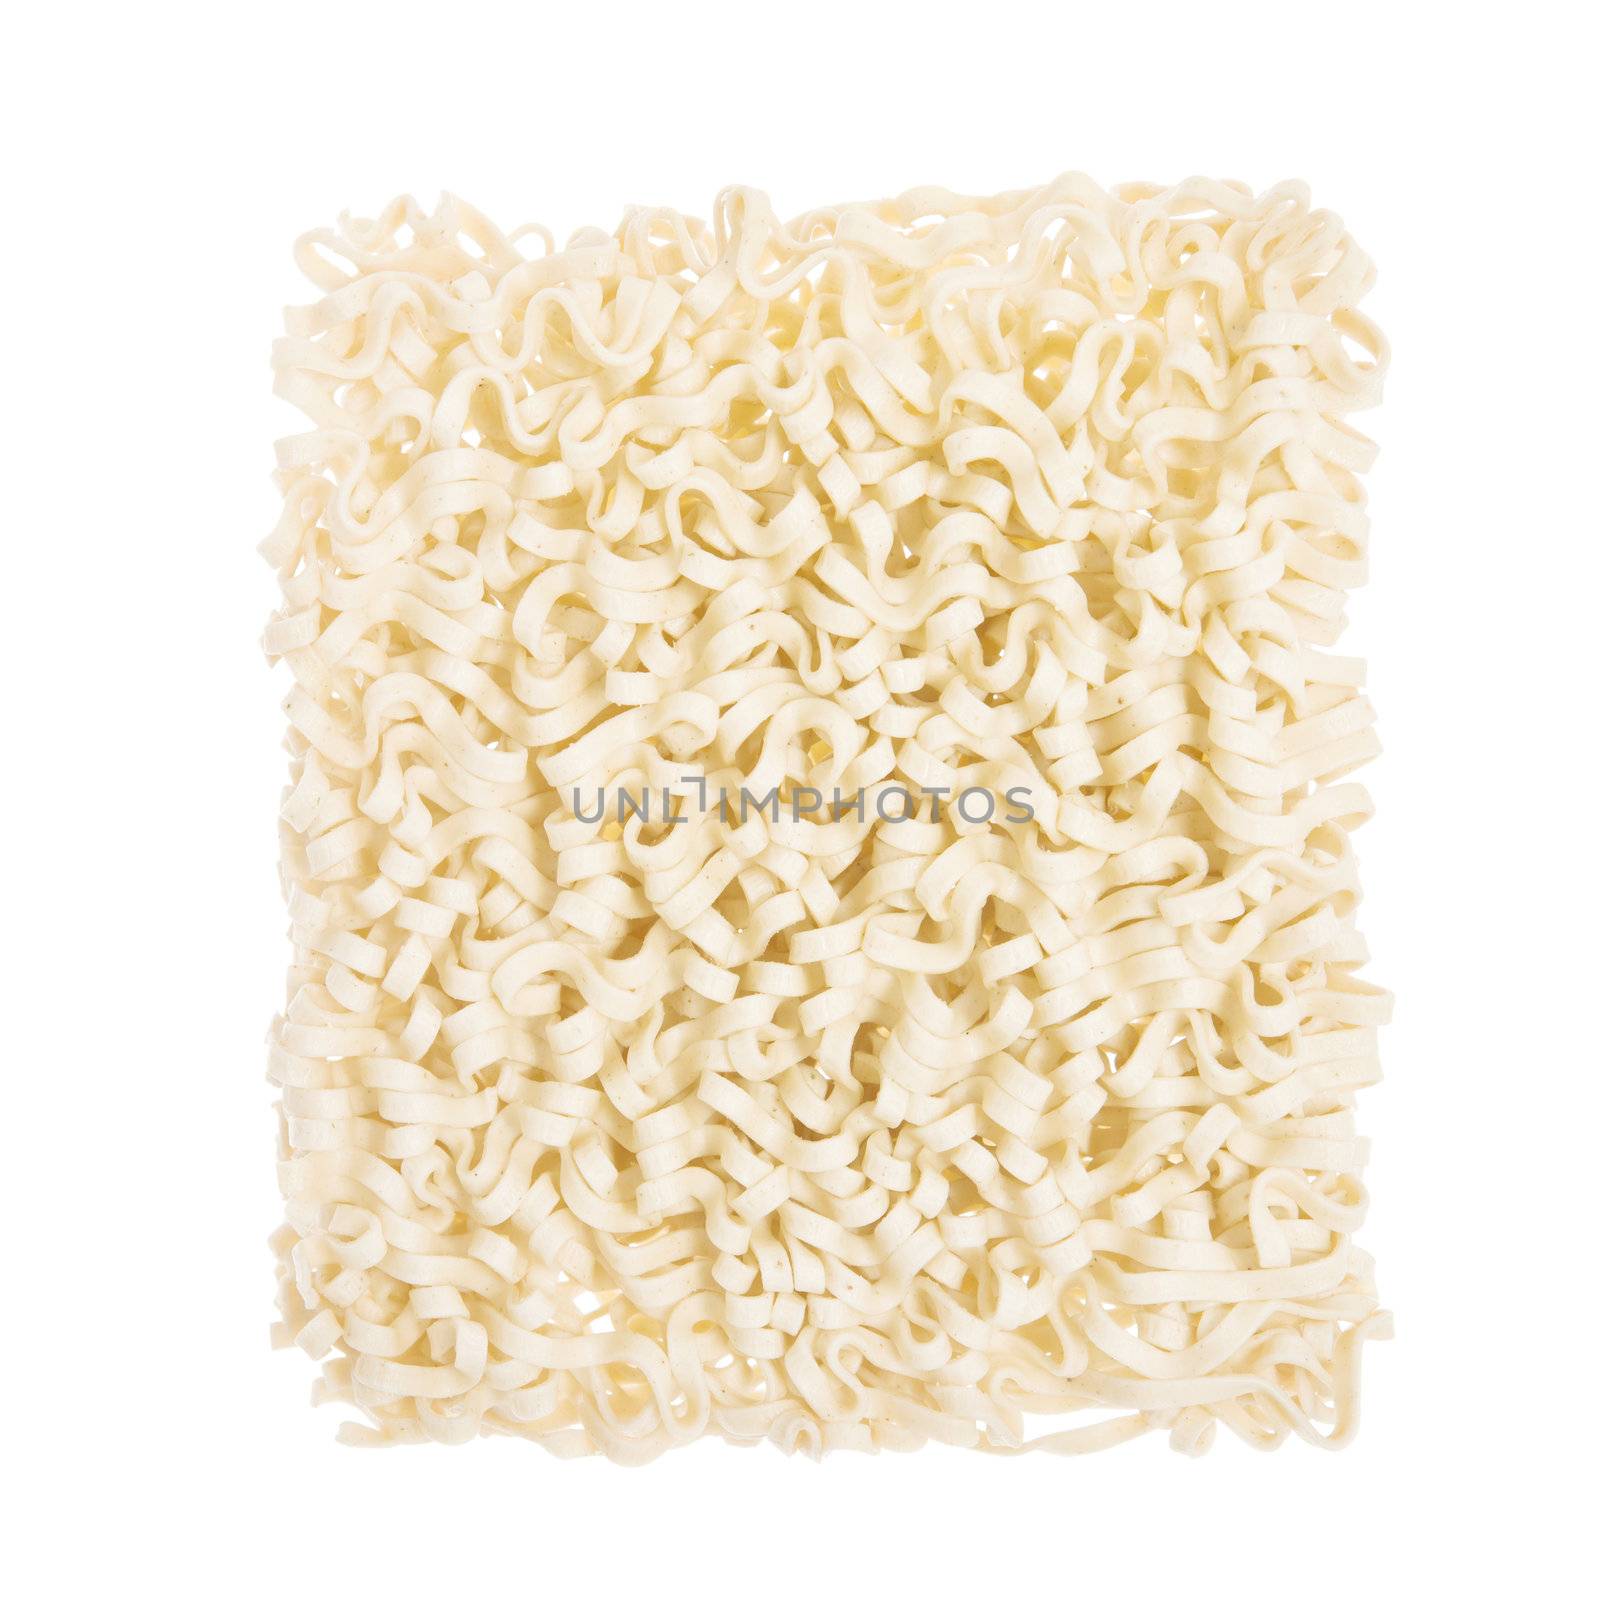 Asian ramen instant noodles block isolated on white background